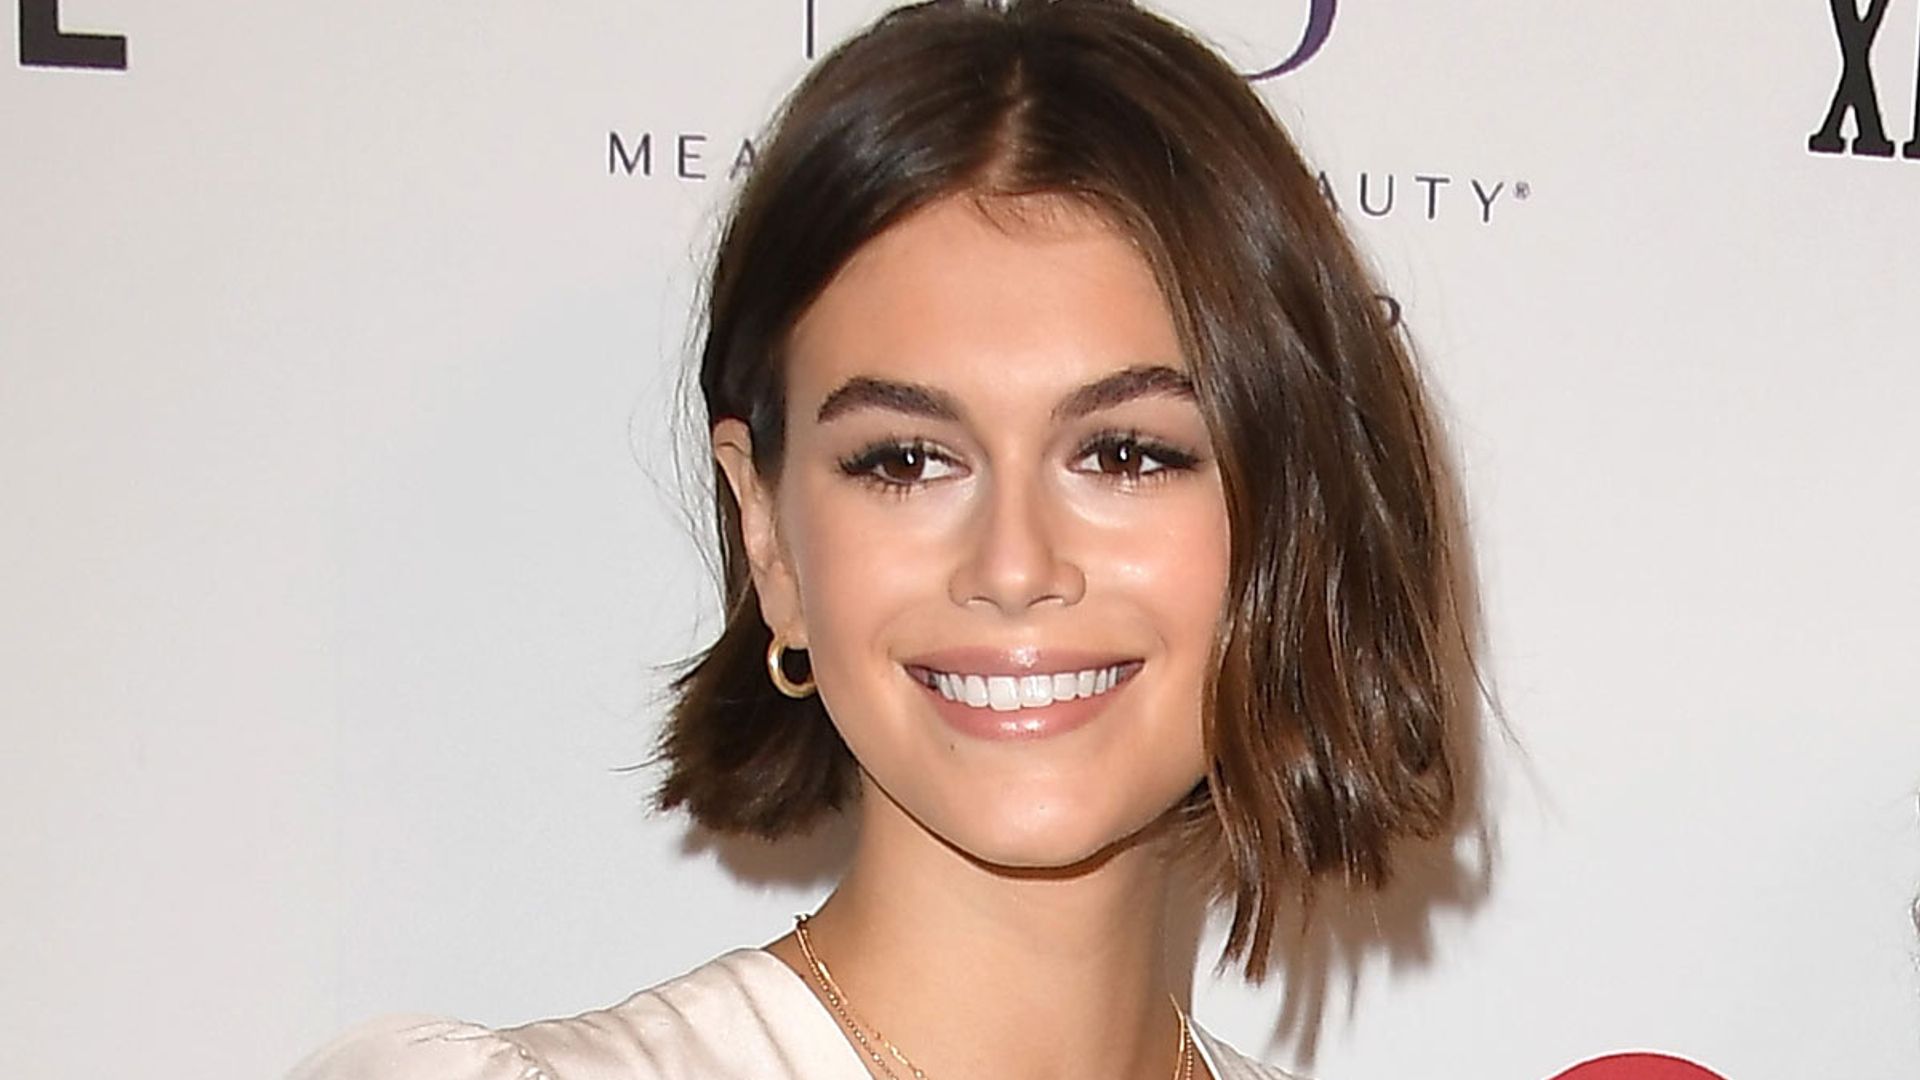 Kaia Gerber stuns Instagram fans with her dramatic hair transformation